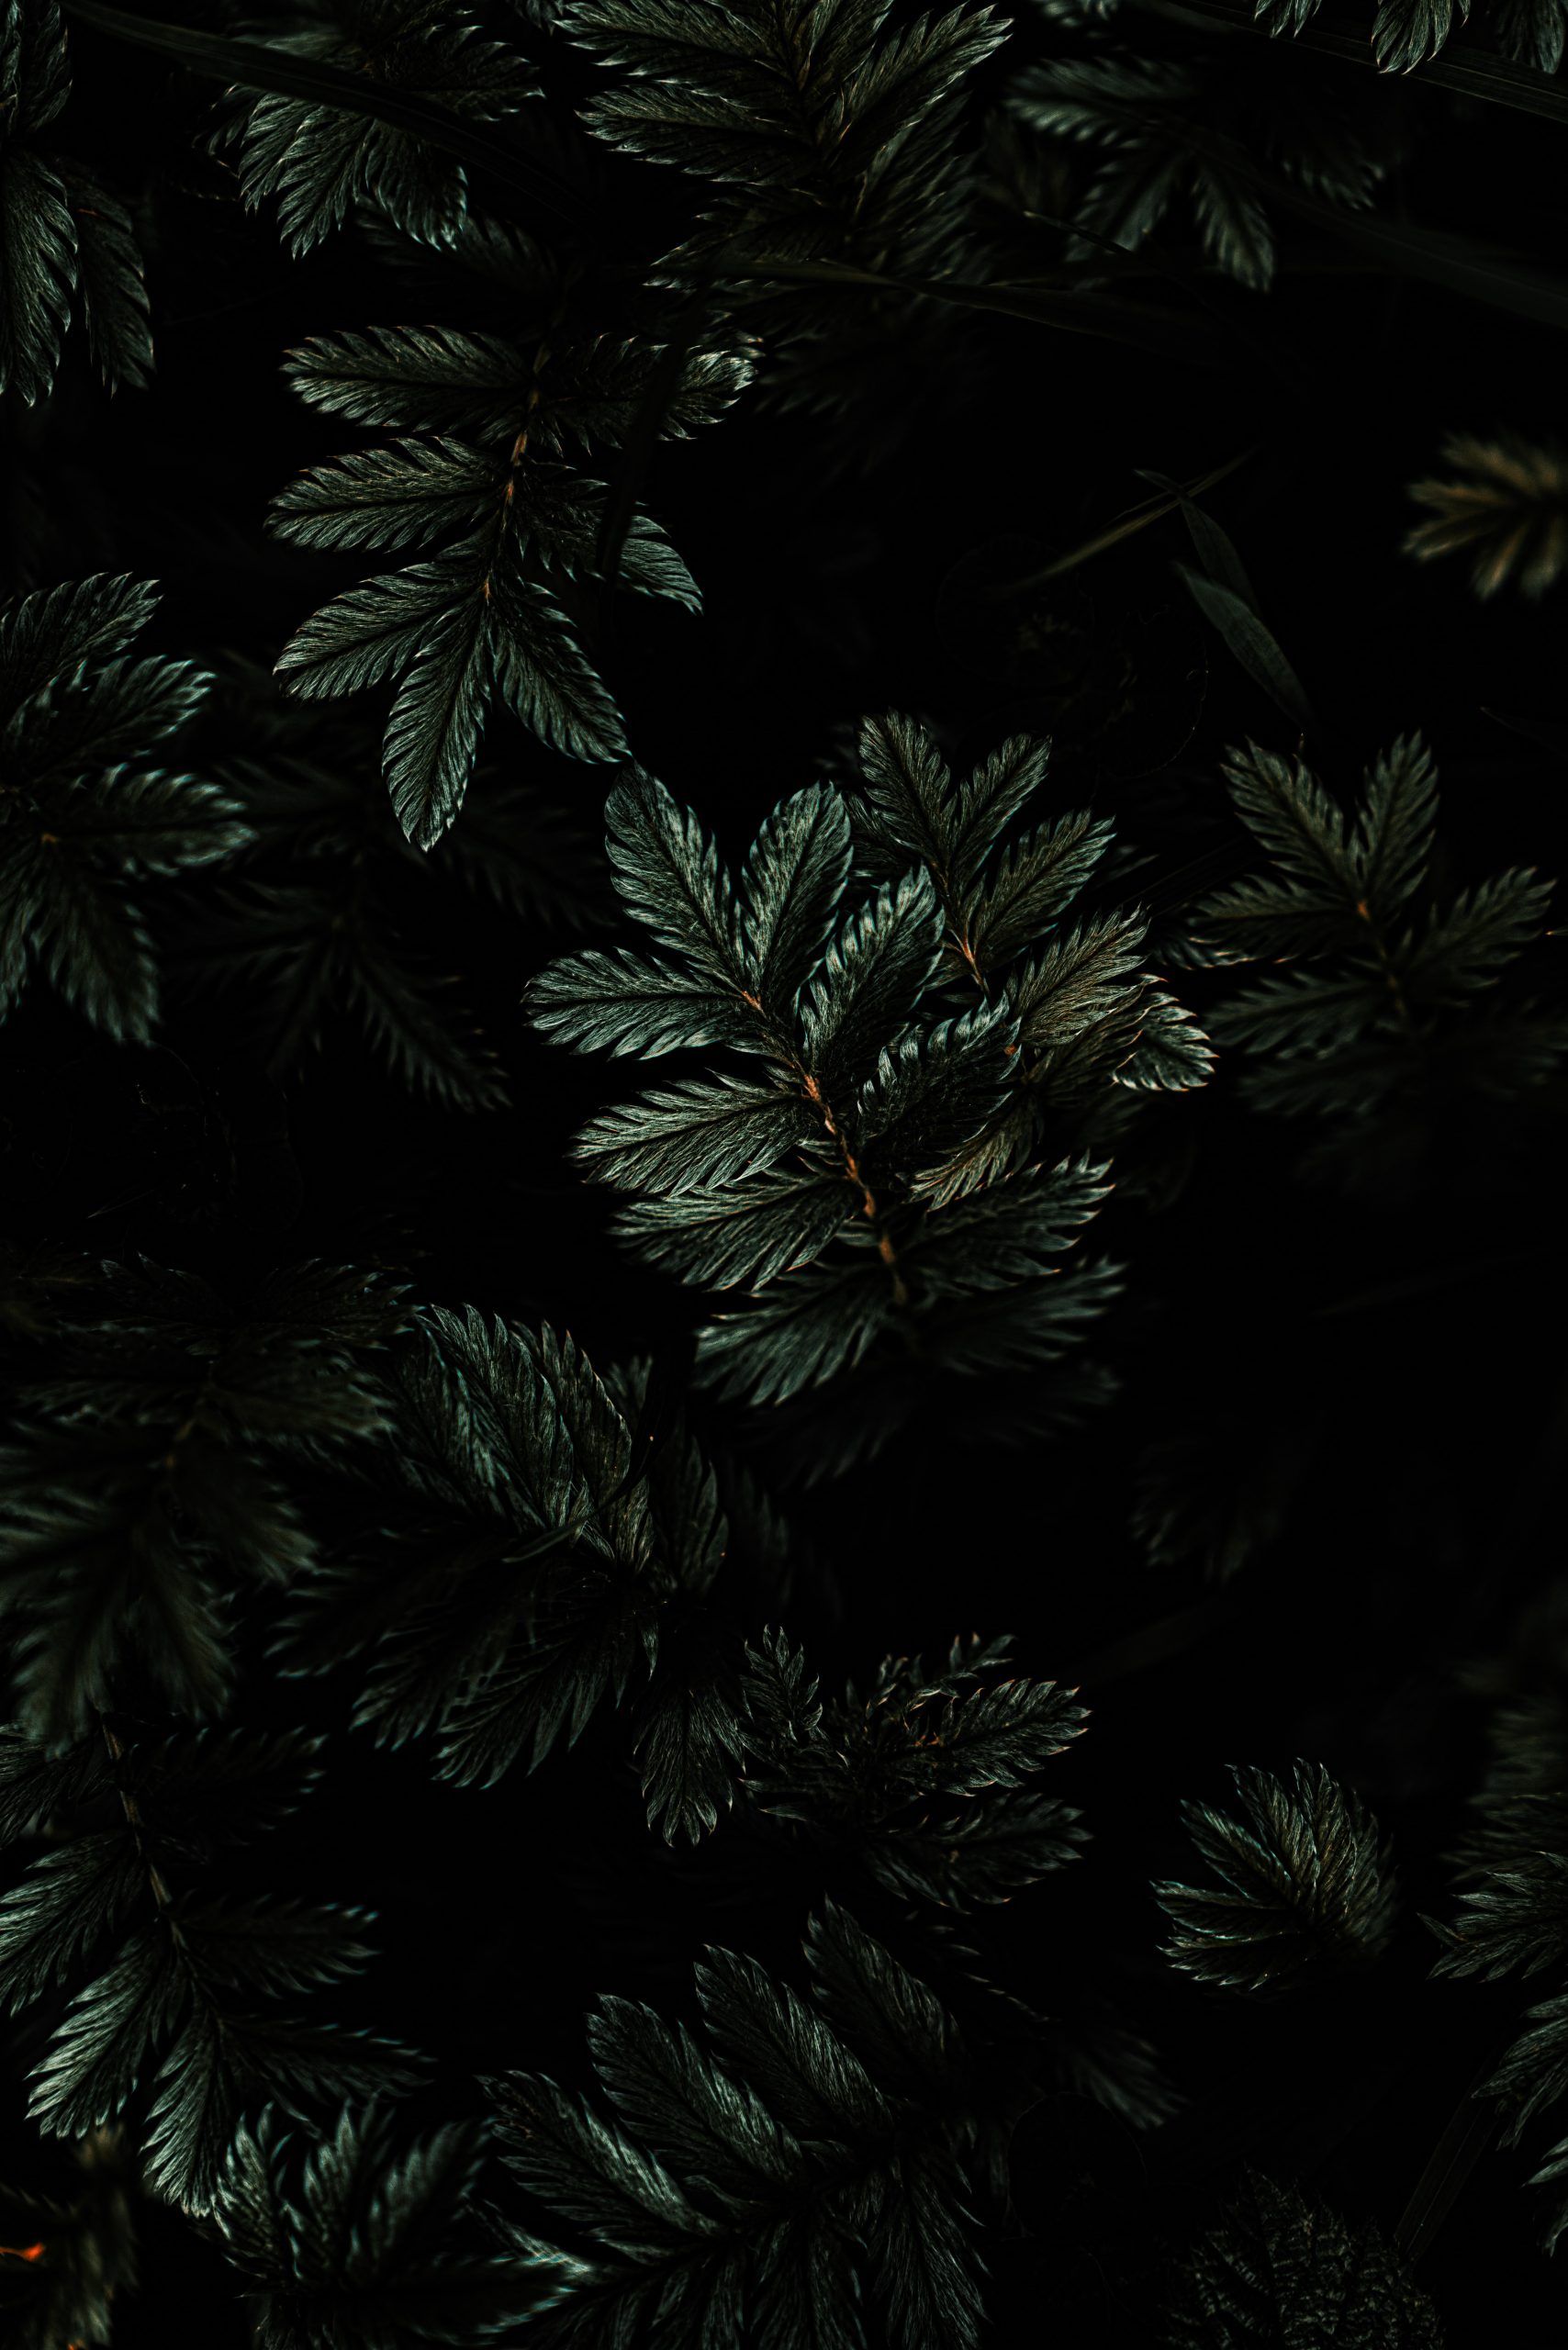 Aesthetic Dark Wallpaper for iPhone That Set the Mood